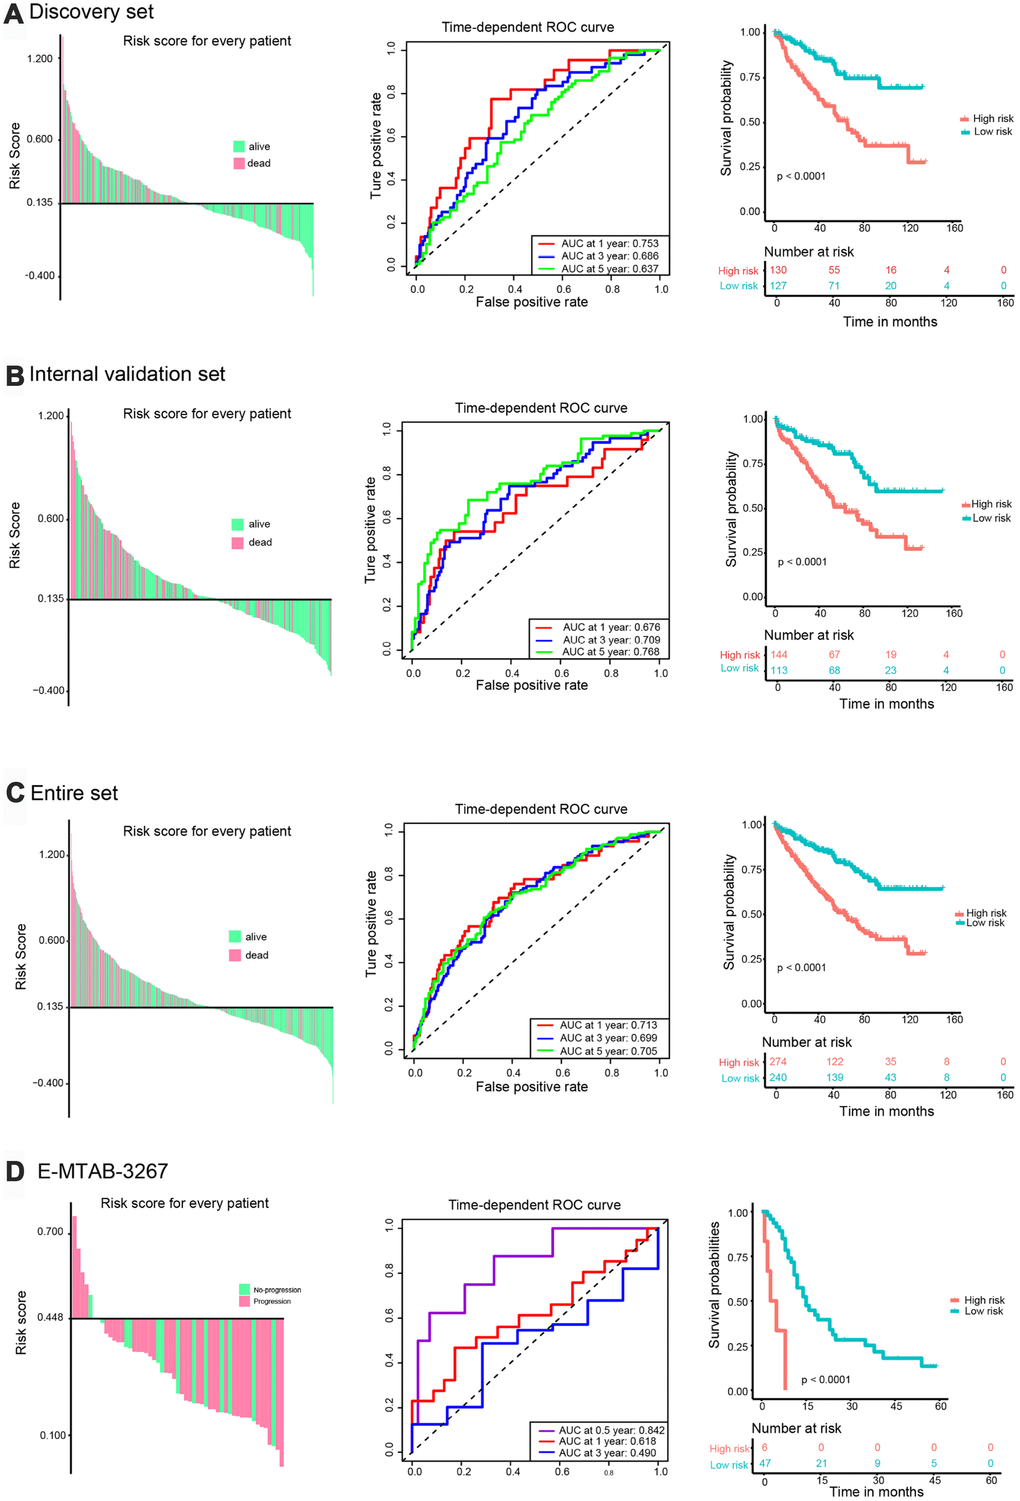 Validation of the prognostic risk signature. Left panel: Distribution of the risk signature based on survival status. High-risk and low-risk patients were distributed above and below the x-axis, respectively. Pink and green colors indicate dead and alive patients, respectively. Middle panel: Time-dependent ROC curves were performed to evaluate the accuracy of the risk signature. Right panel: Kaplan-Meier survival curves were performed to assess patients’ prognosis. (A) TCGA discovery set. (B) Validation set. (C) Entire set. (D) E-MTAB-3267.